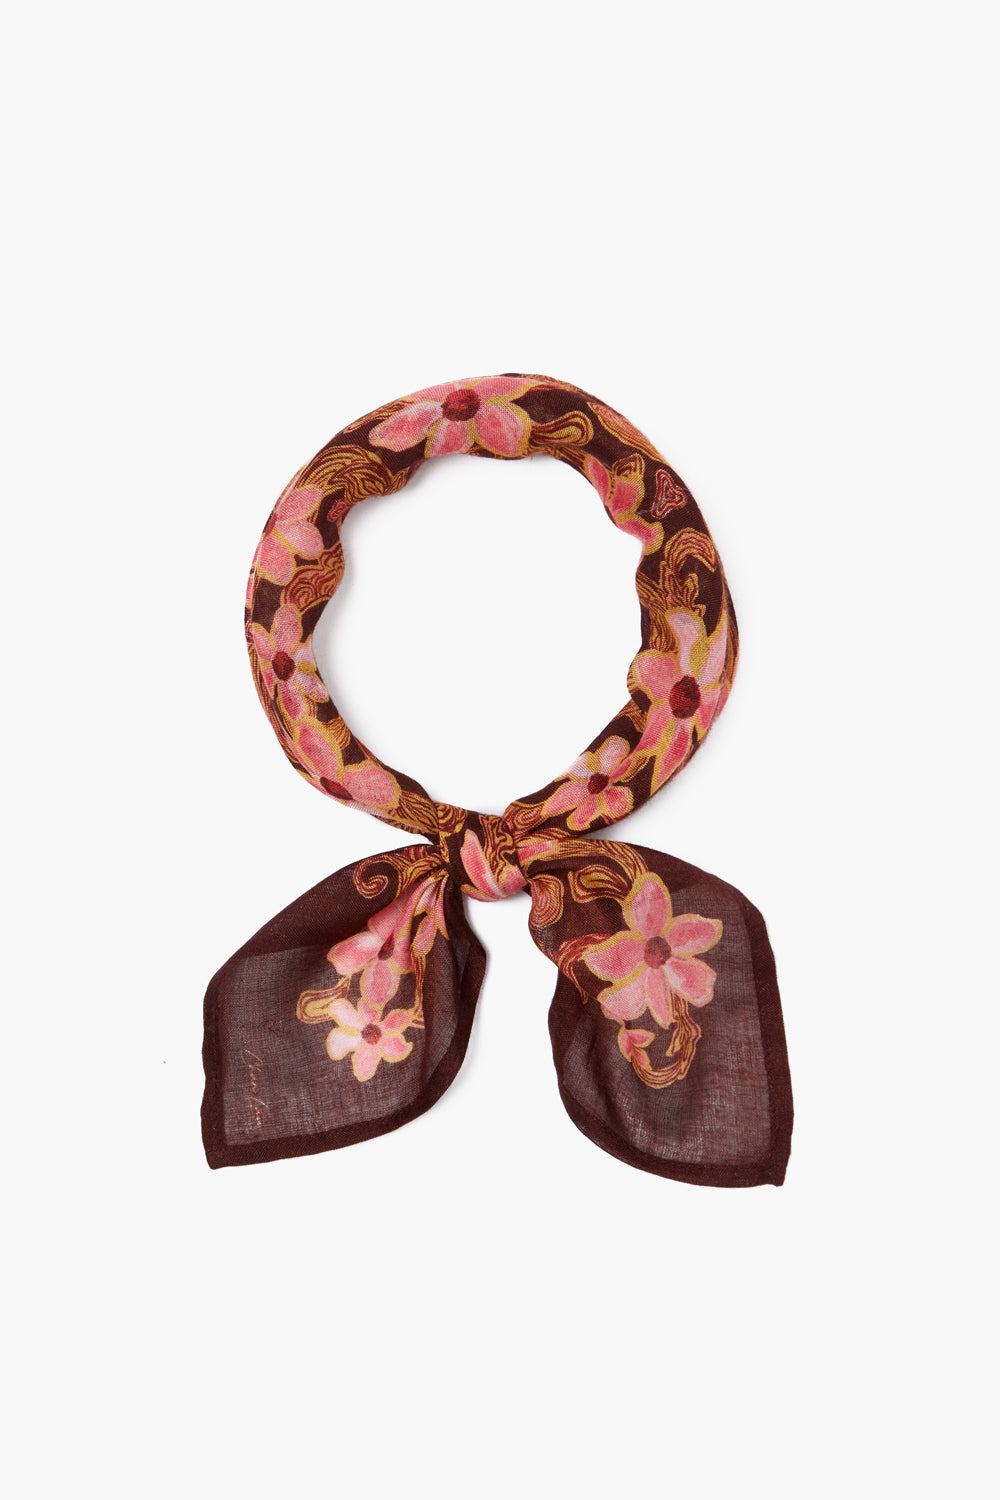 ABSTRACT FLORAL BANDANA-FIRED BRICK - Kingfisher Road - Online Boutique